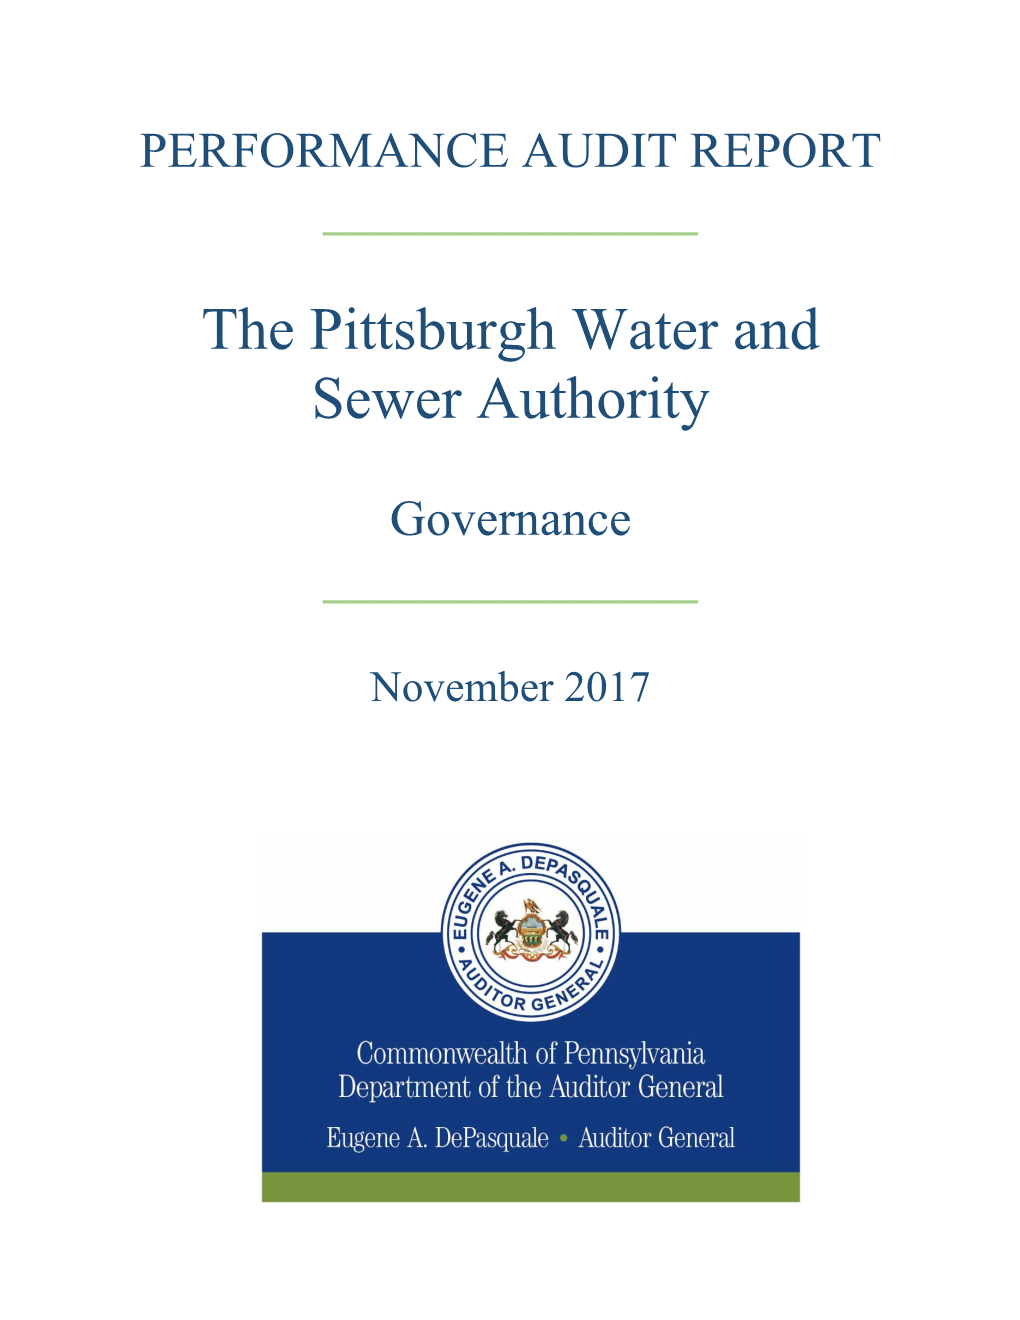 The Pittsburgh Water and Sewer Authority